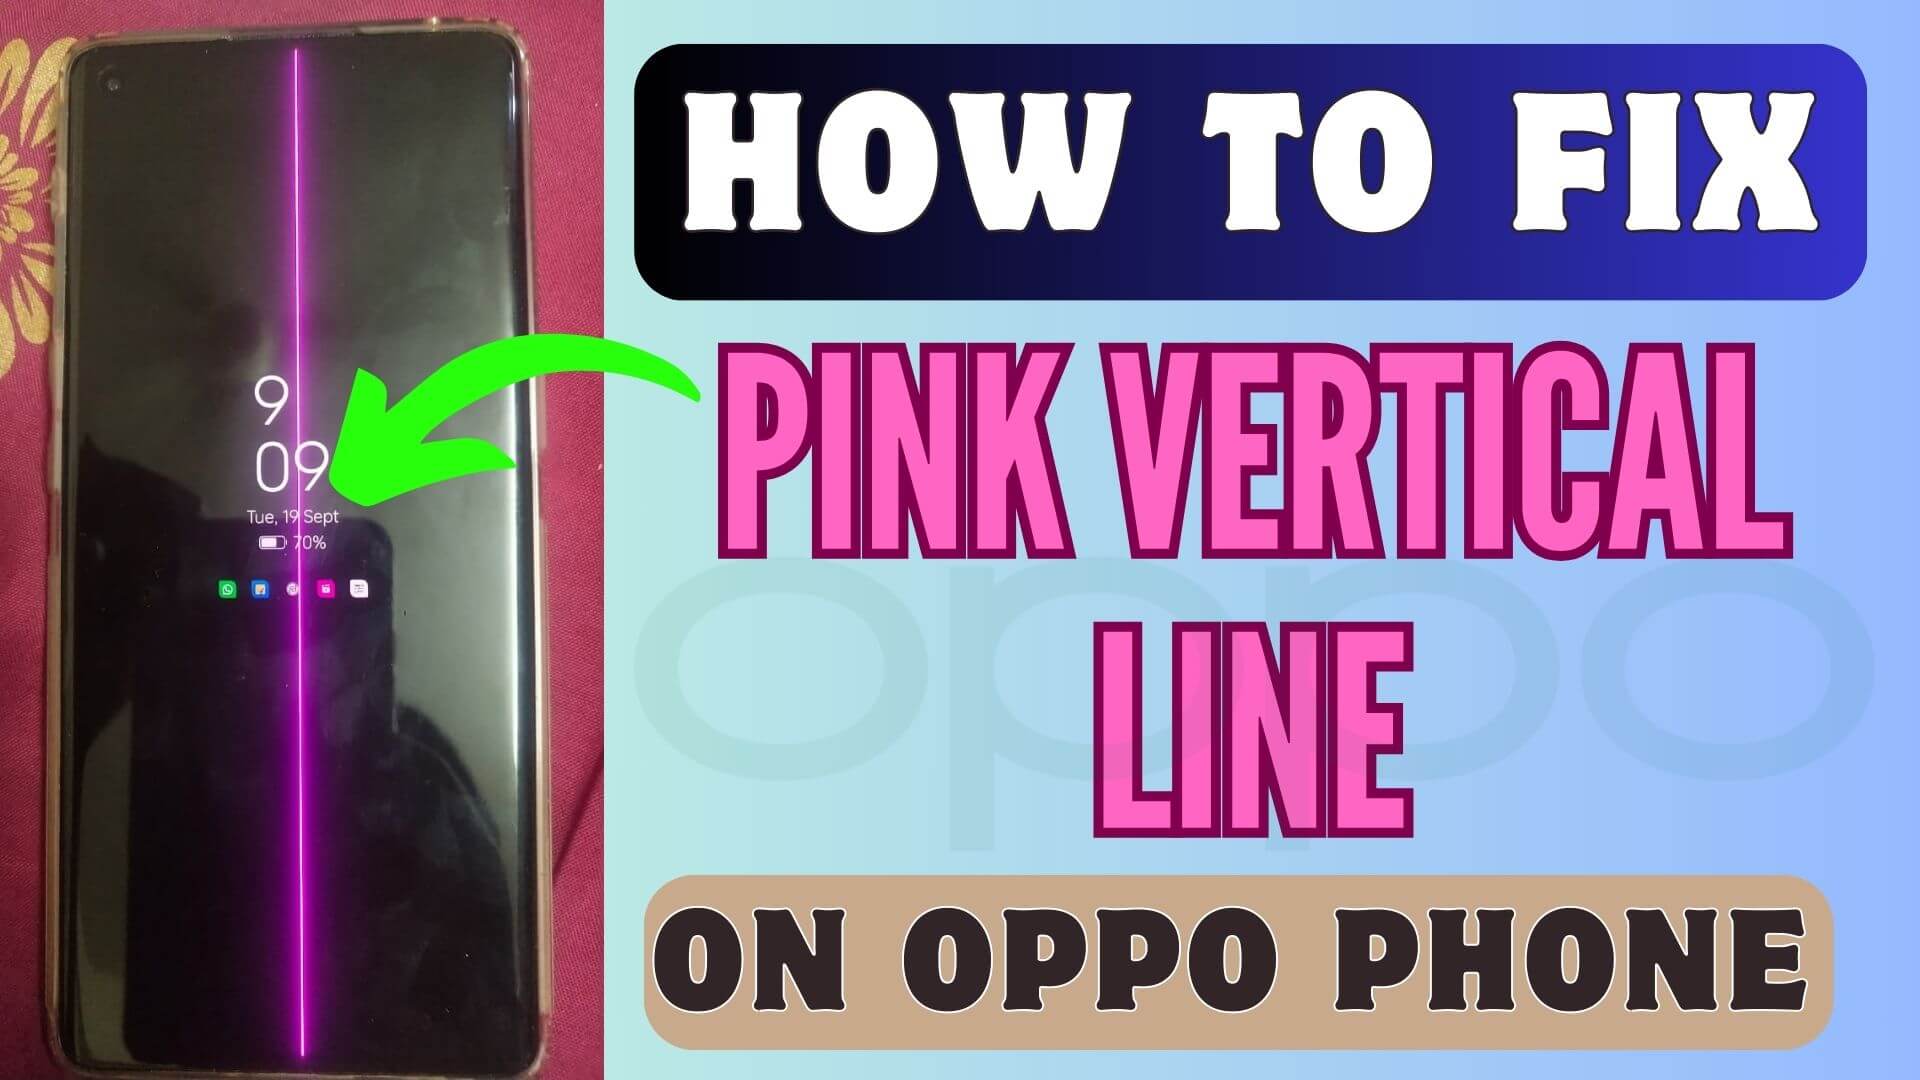 How To Fix Pink Vertical Line On Oppo Phone